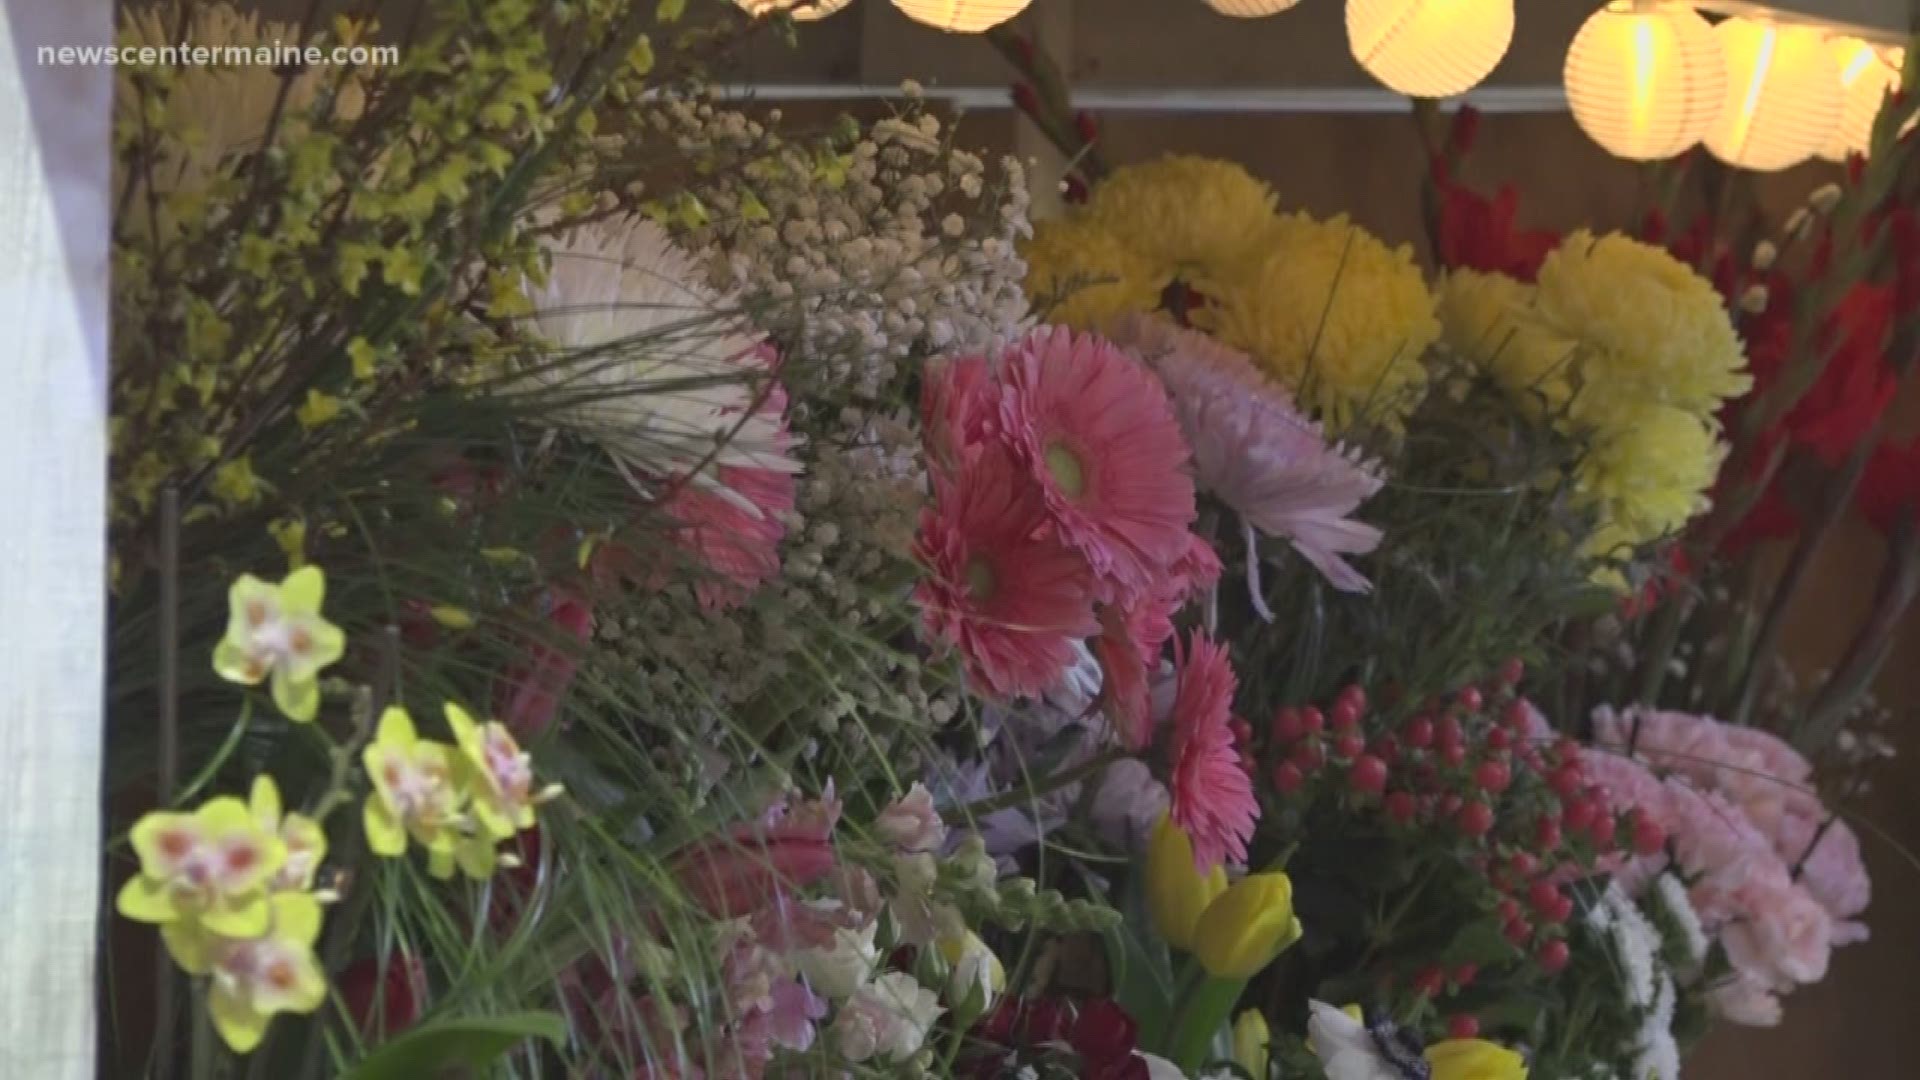 The Bangor Flower Show is running this weekend.